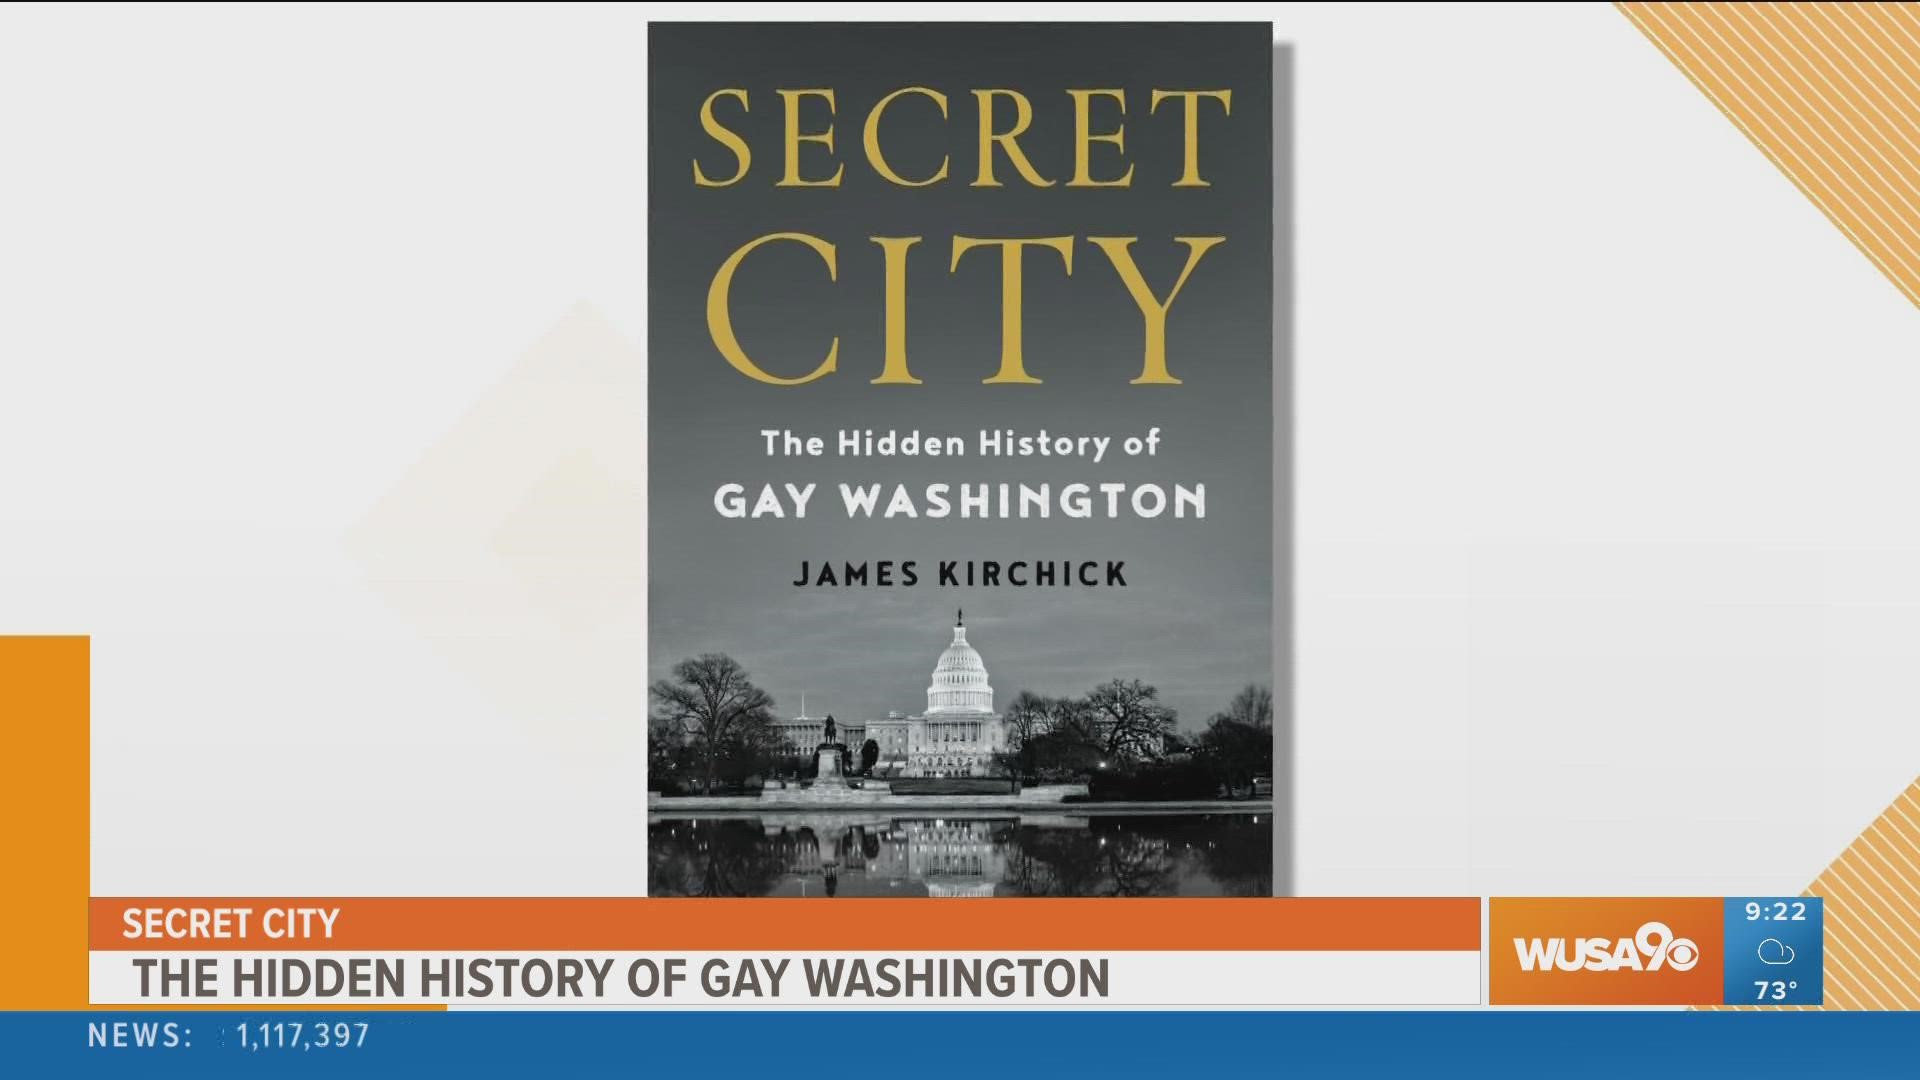 Author James Kirchick talks about the impact of homosexuality in U.S. politics as noted in his book, "Secret City: The Hidden History of Gay Washington".